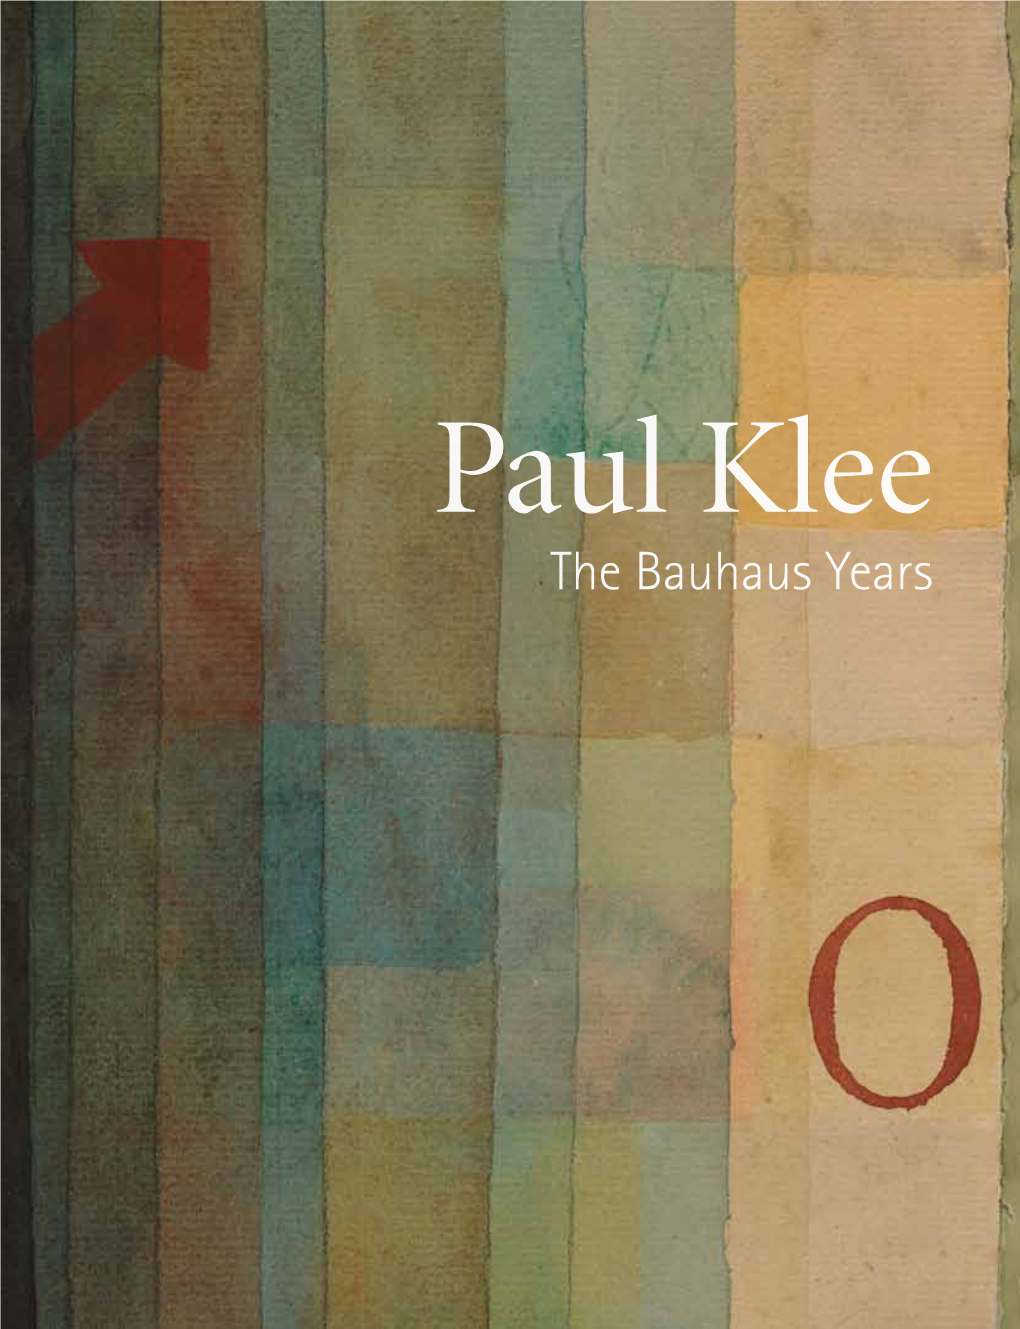 Paul Klee—The Bauhaus Years: Works from 1918–1931 May 2–June 14, 2013 Curated by Olivier Berggruen